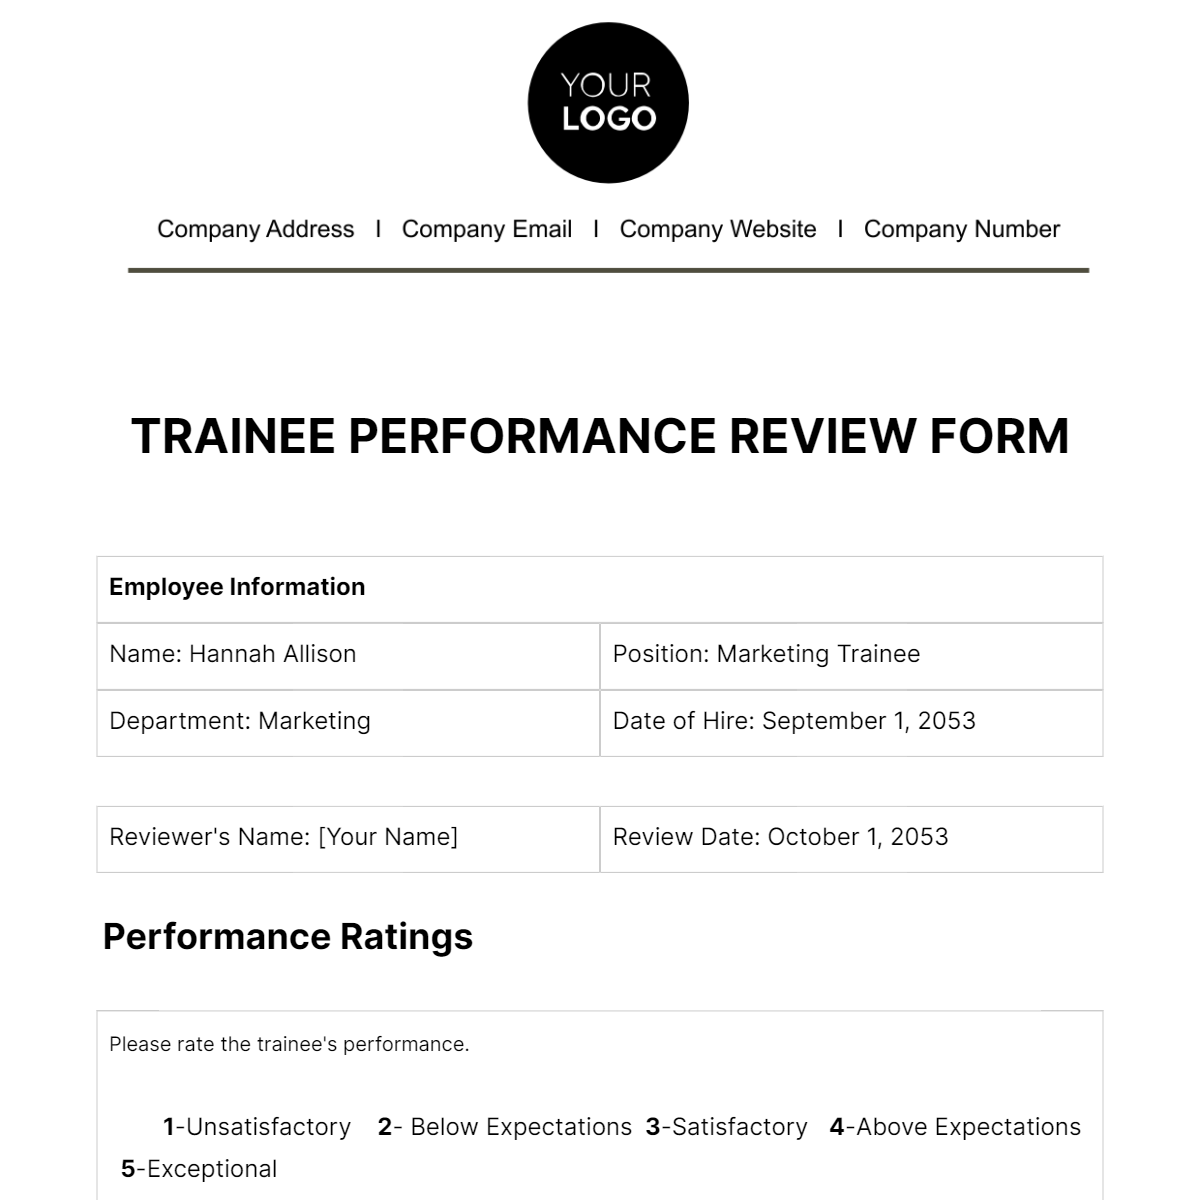 Trainee Performance Review Form HR Template